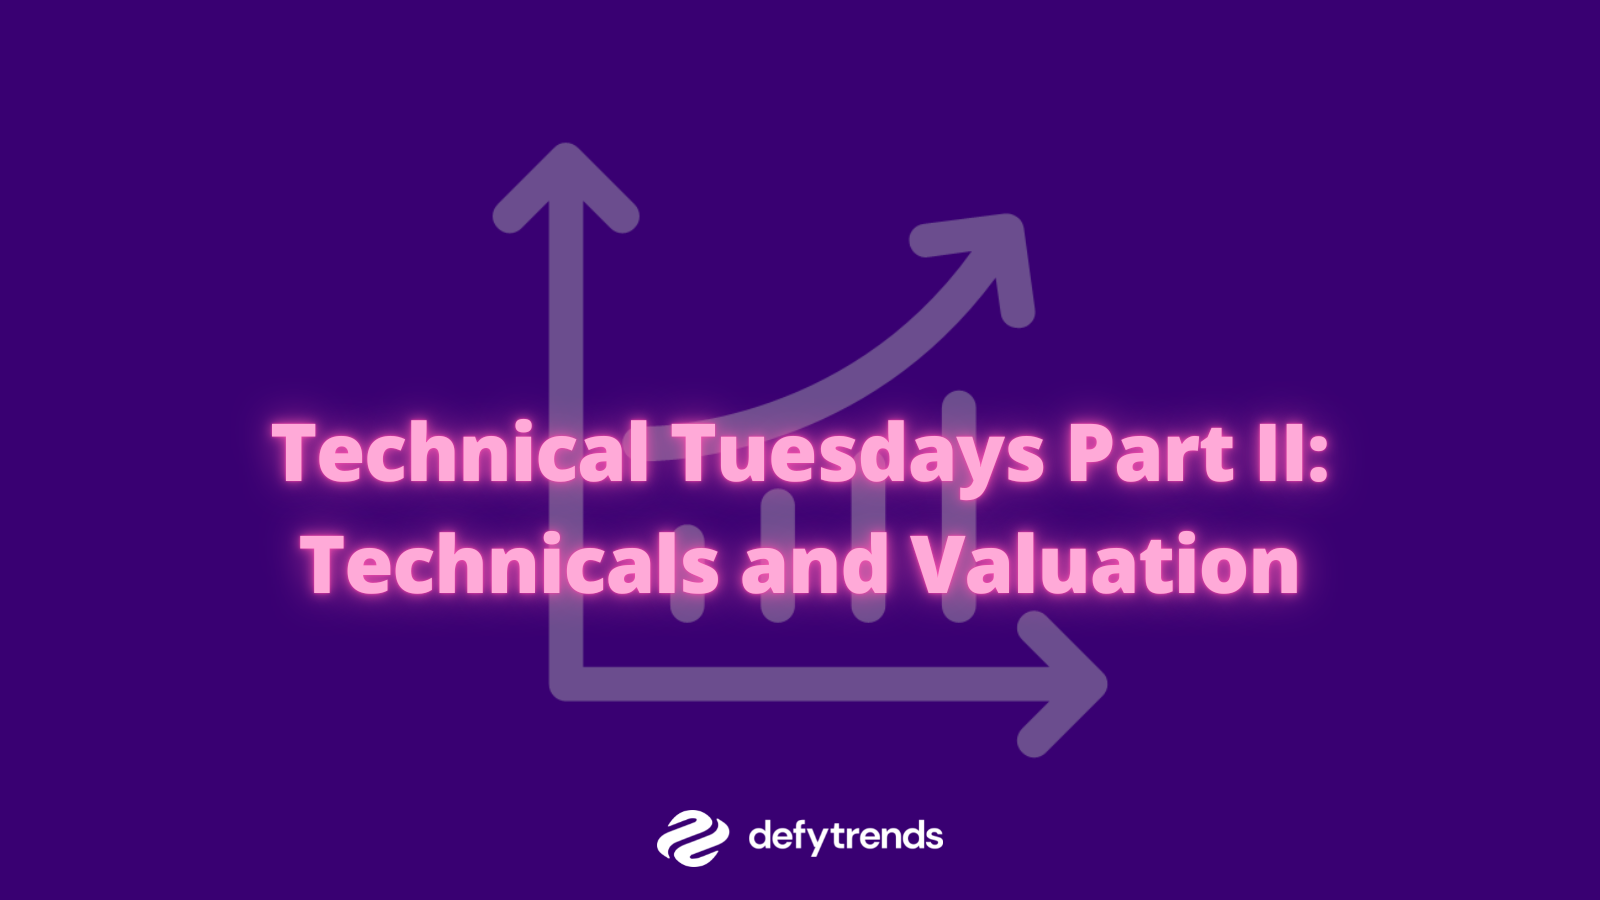 Technical Tuesdays Part II: Technicals and Valuation